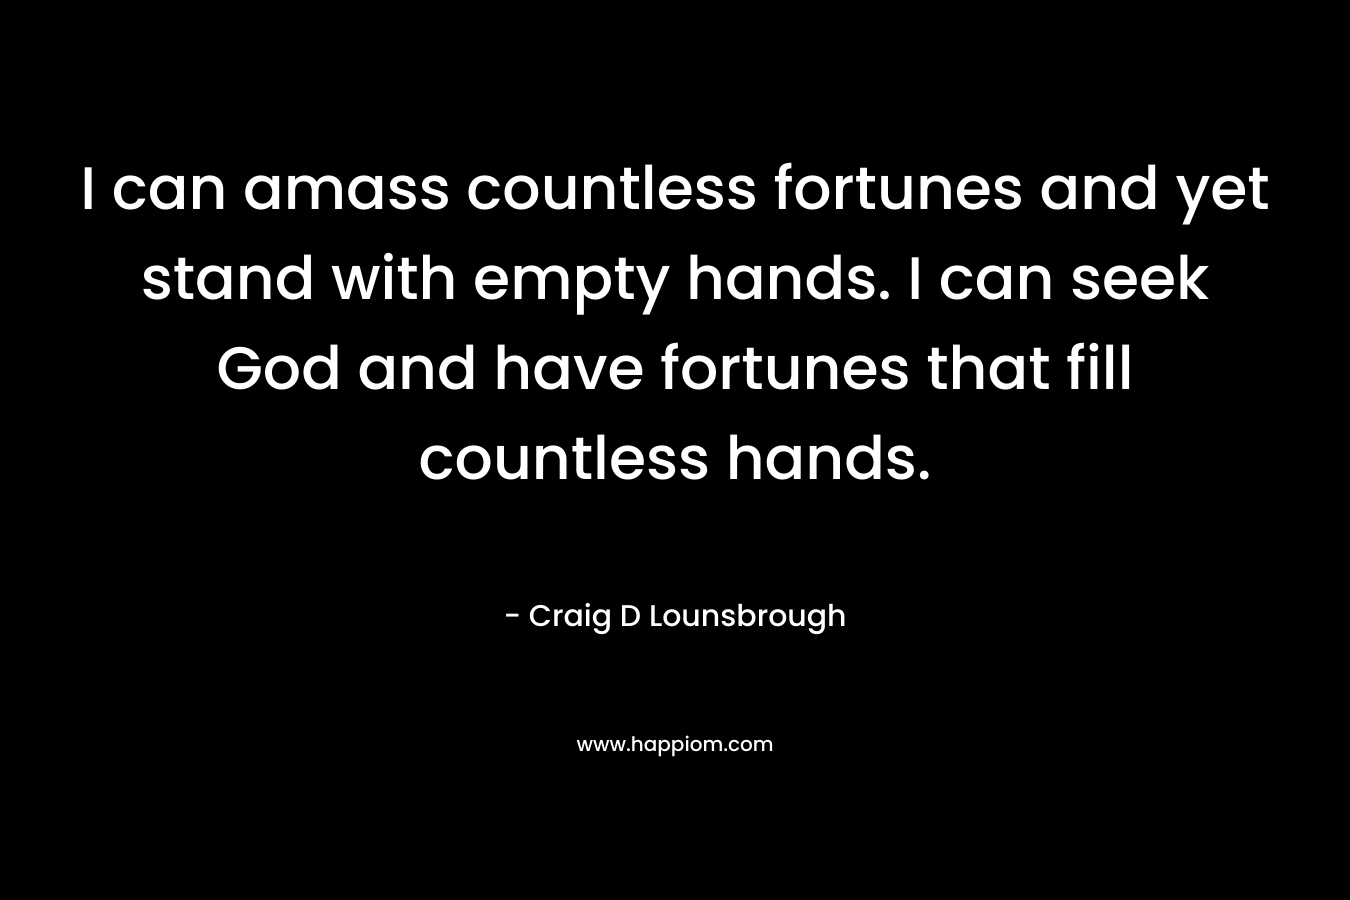 I can amass countless fortunes and yet stand with empty hands. I can seek God and have fortunes that fill countless hands. – Craig D Lounsbrough